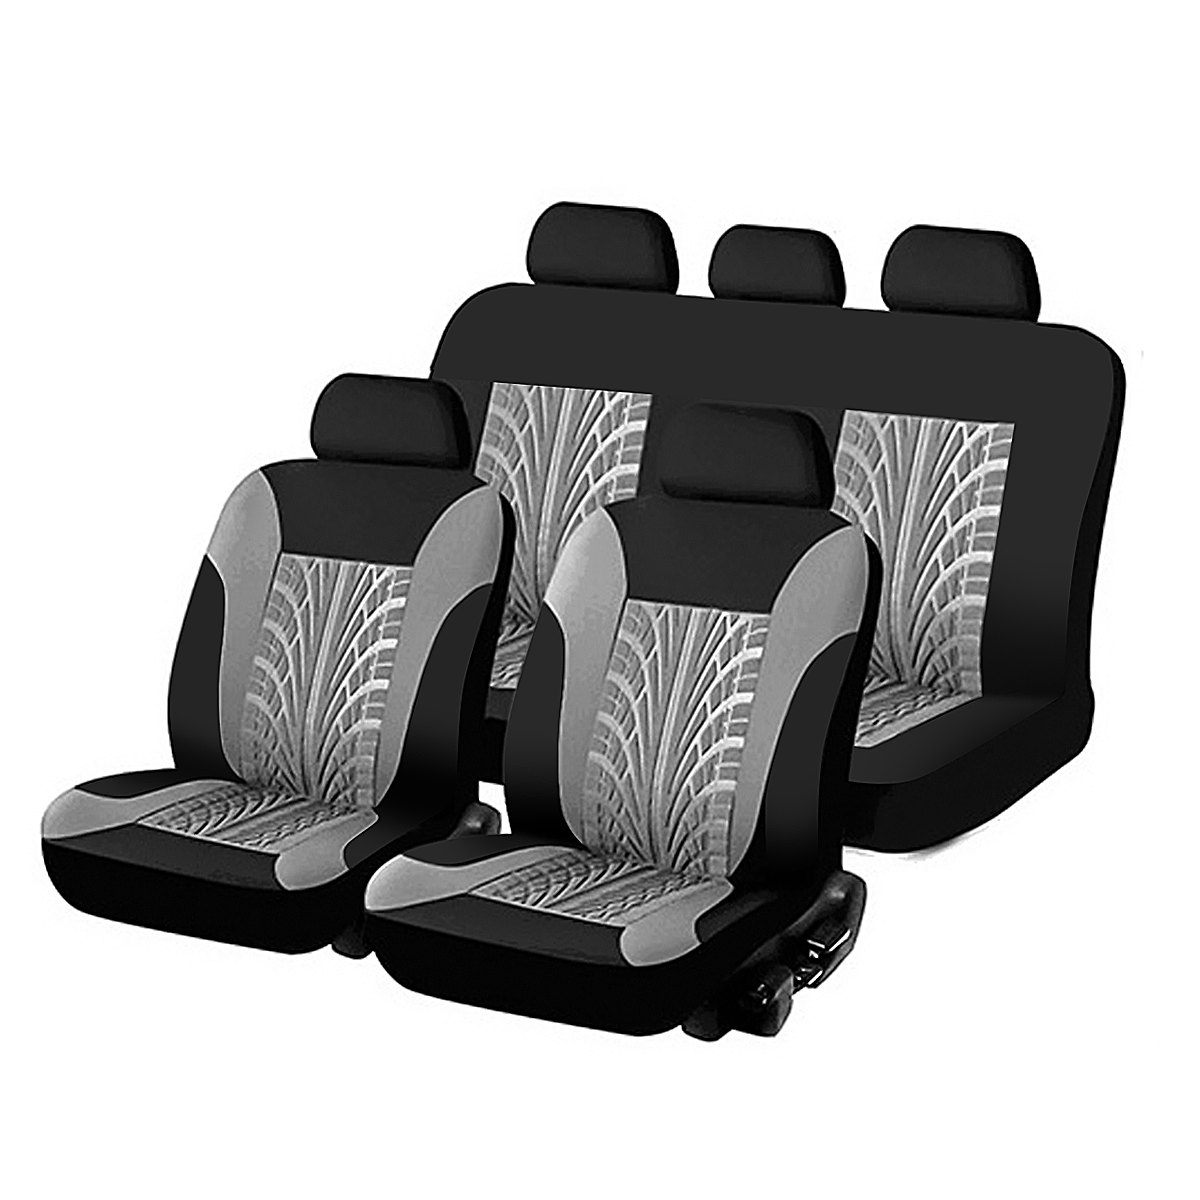 

Universal 9PCS Full SetAuto Seat Covers Tyre Track Embossed Car Seat Cover For Car Truck SUV Van 4 Colors Durable Poly